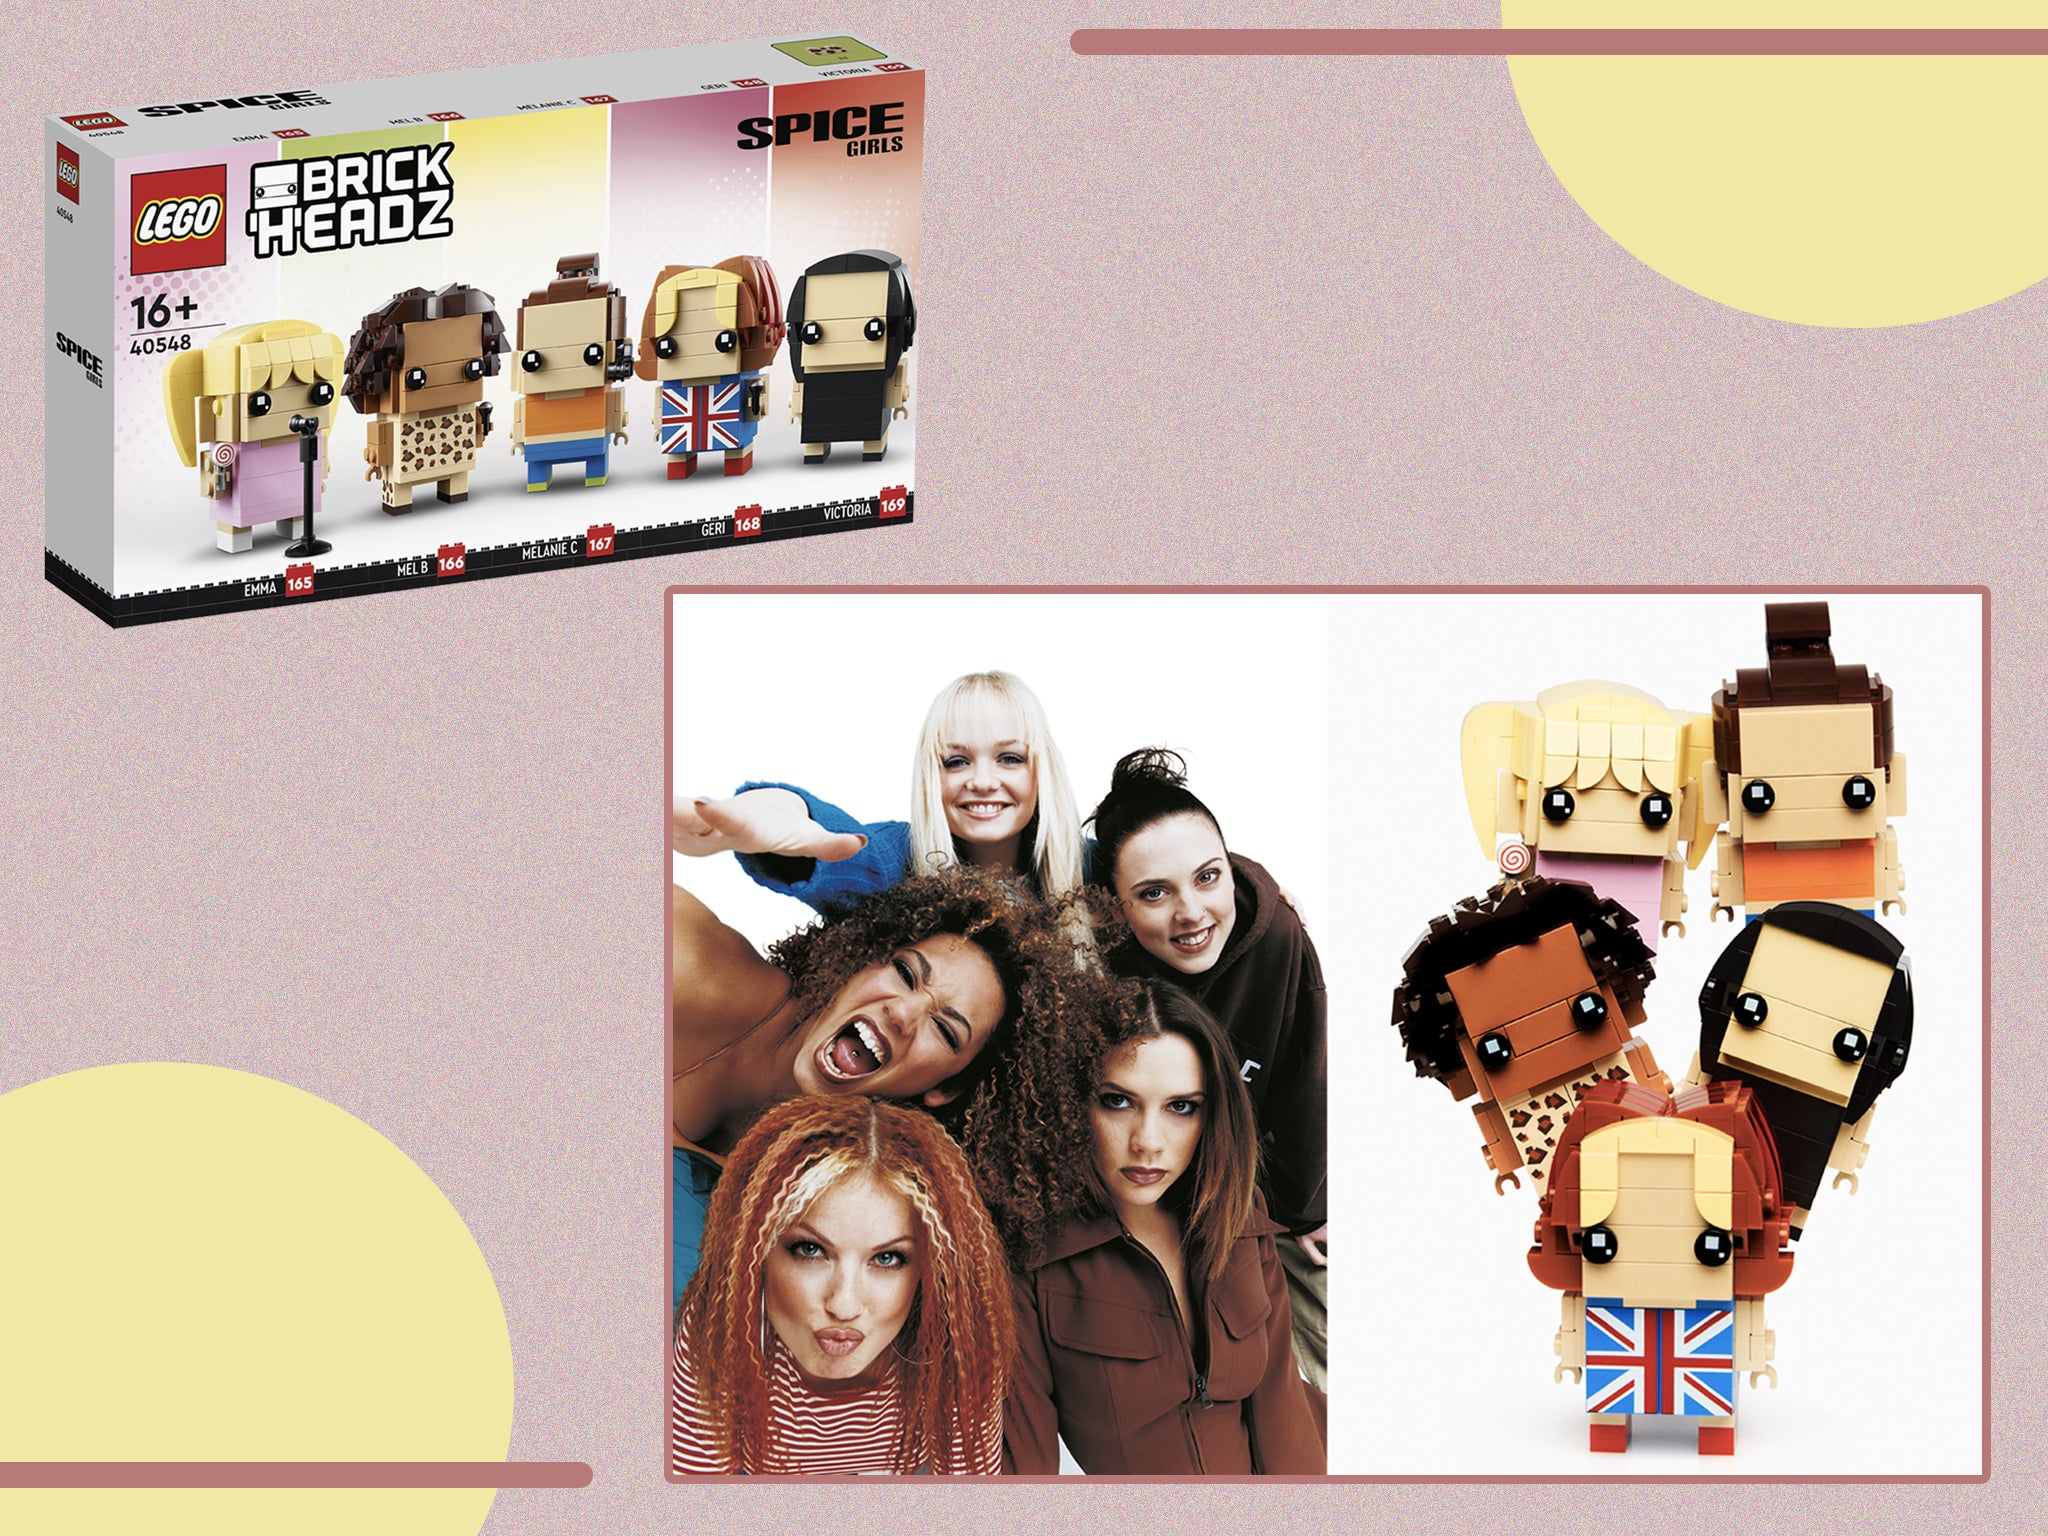 Lego launches Spice Girls figurines: How to buy | The Independent